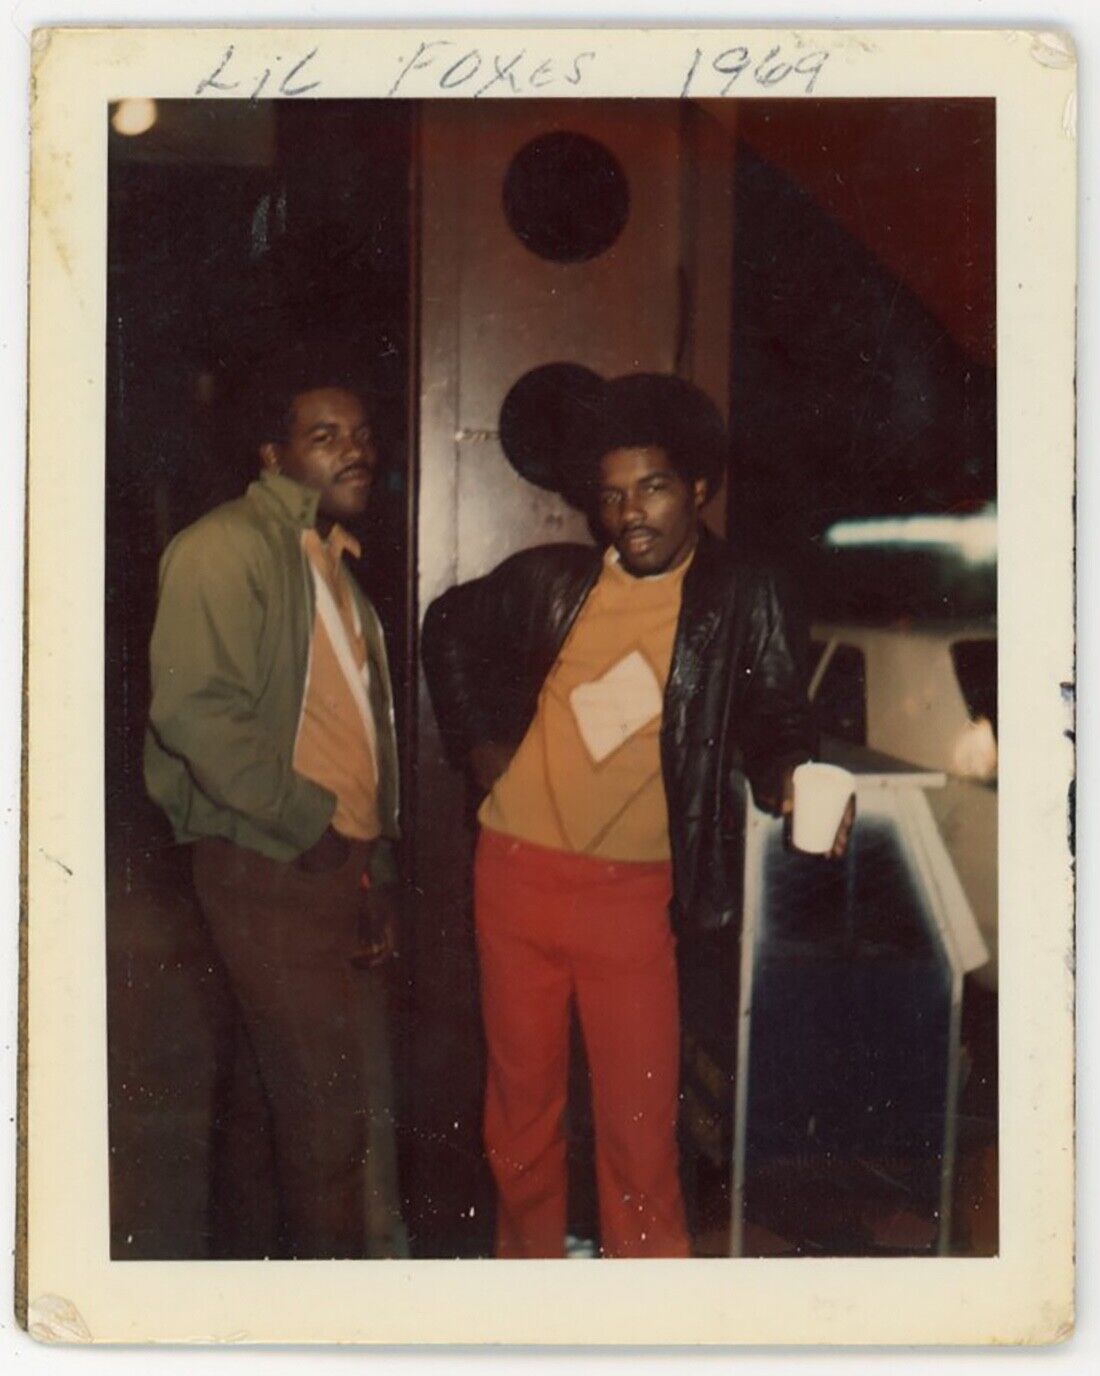 1969  COLOR POLAROID PHOTO COOL fashionable BLACK MEN African American AT BAR